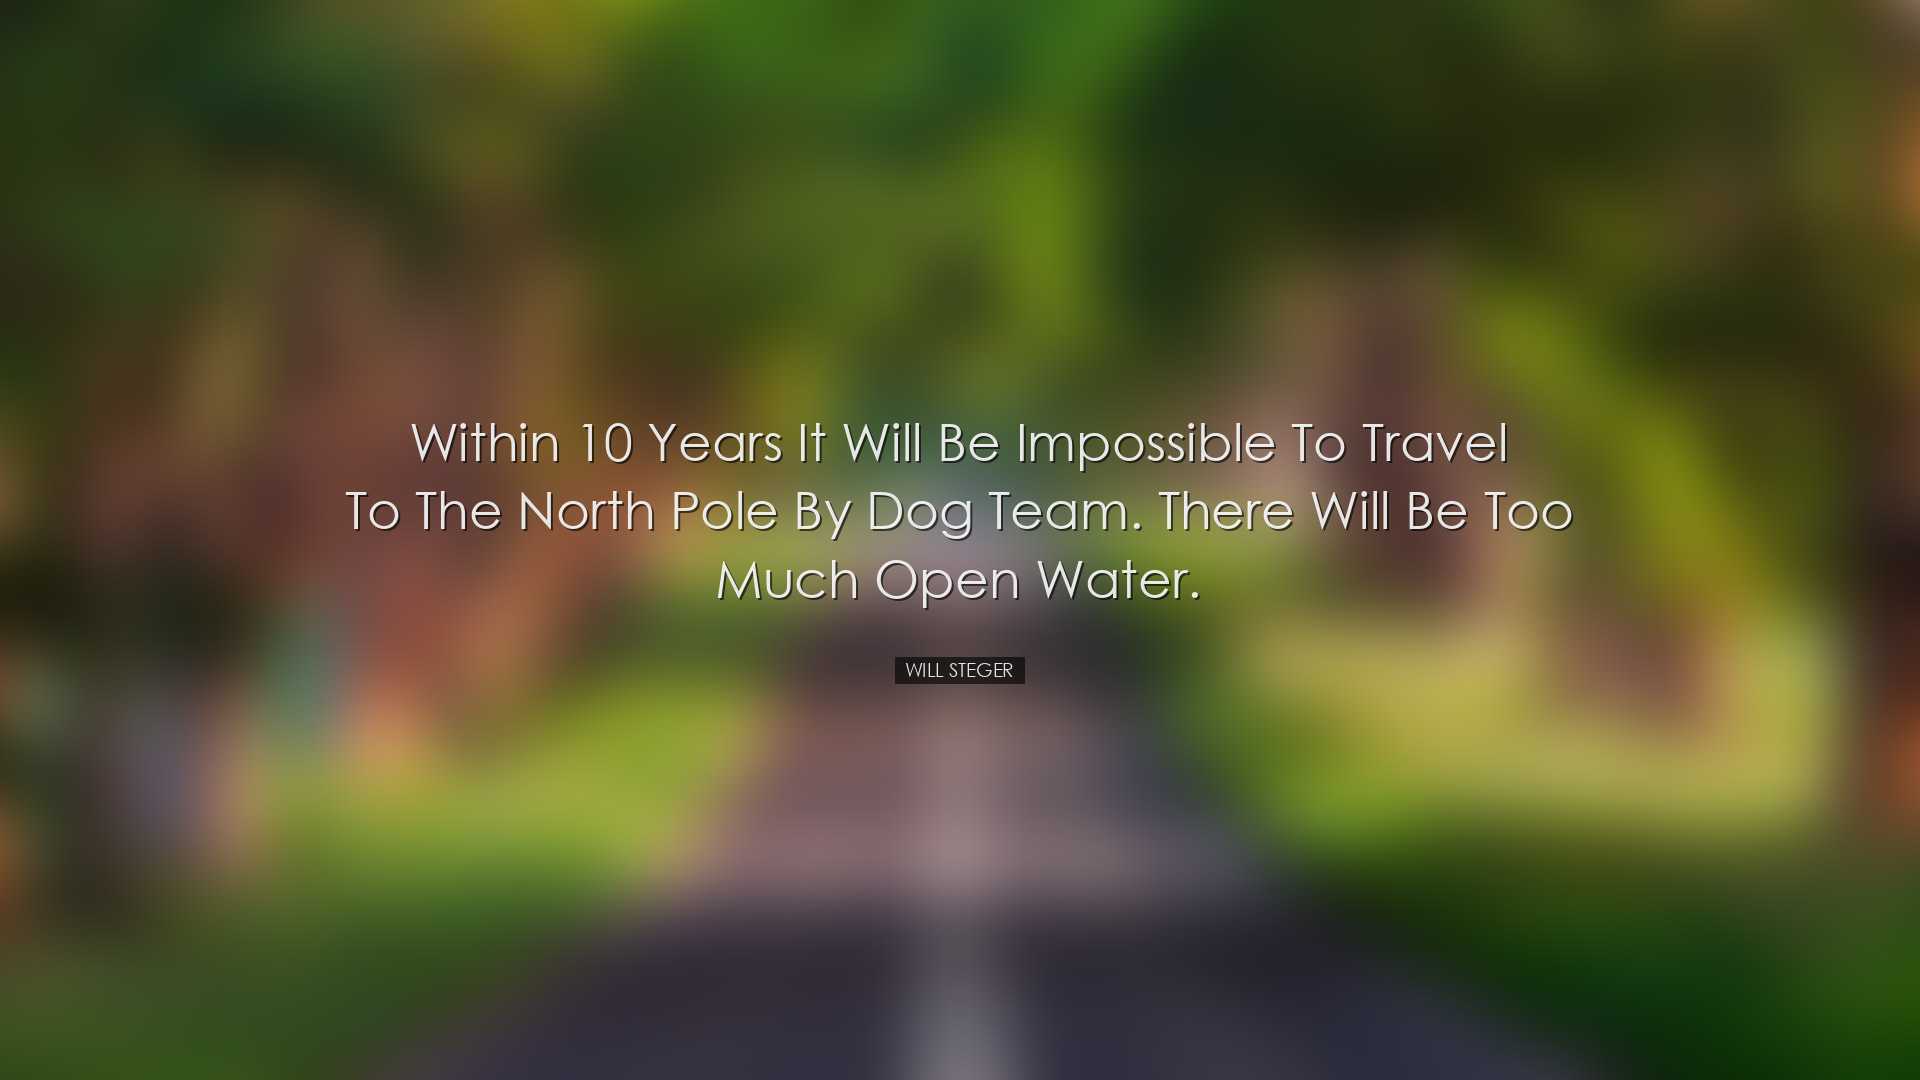 Within 10 years it will be impossible to travel to the North Pole